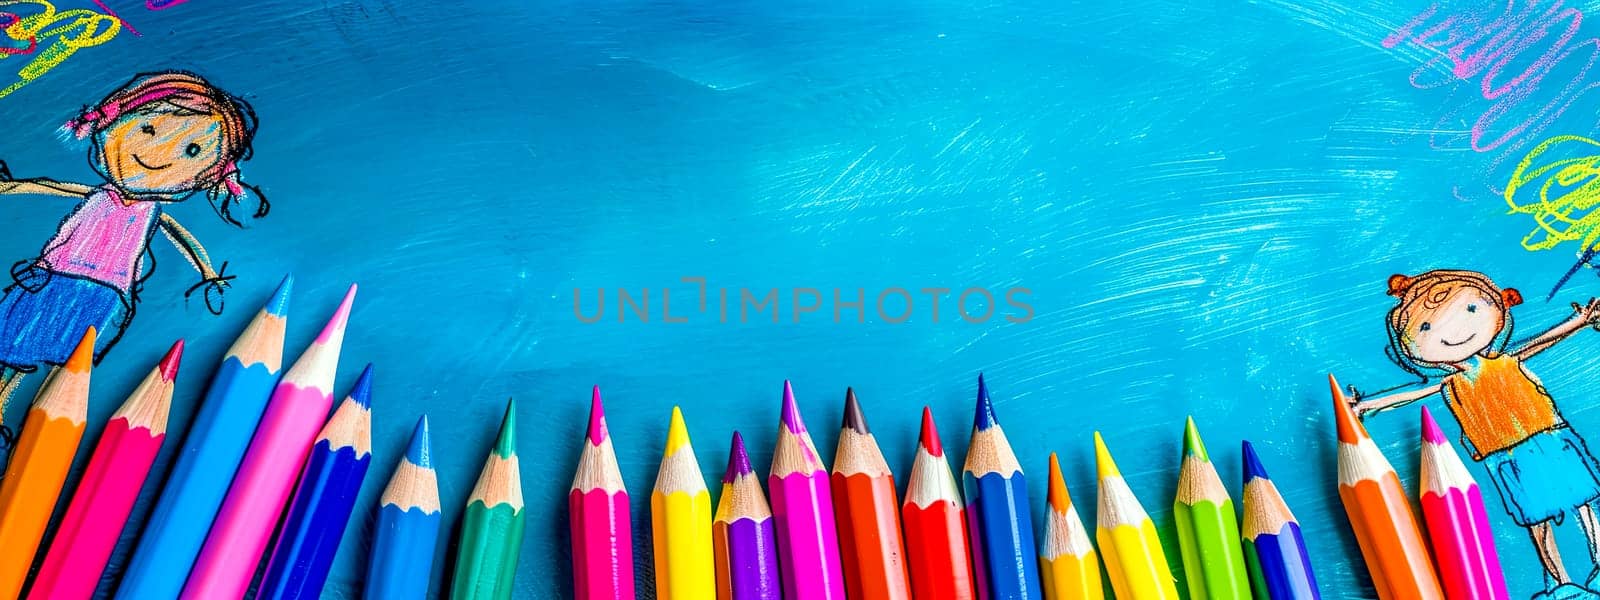 children's drawing, featuring crayon sketches of two smiling figures against a bright blue background, accompanied by a colorful array of sharpened pencils arranged in a neat row at the bottom. by Edophoto